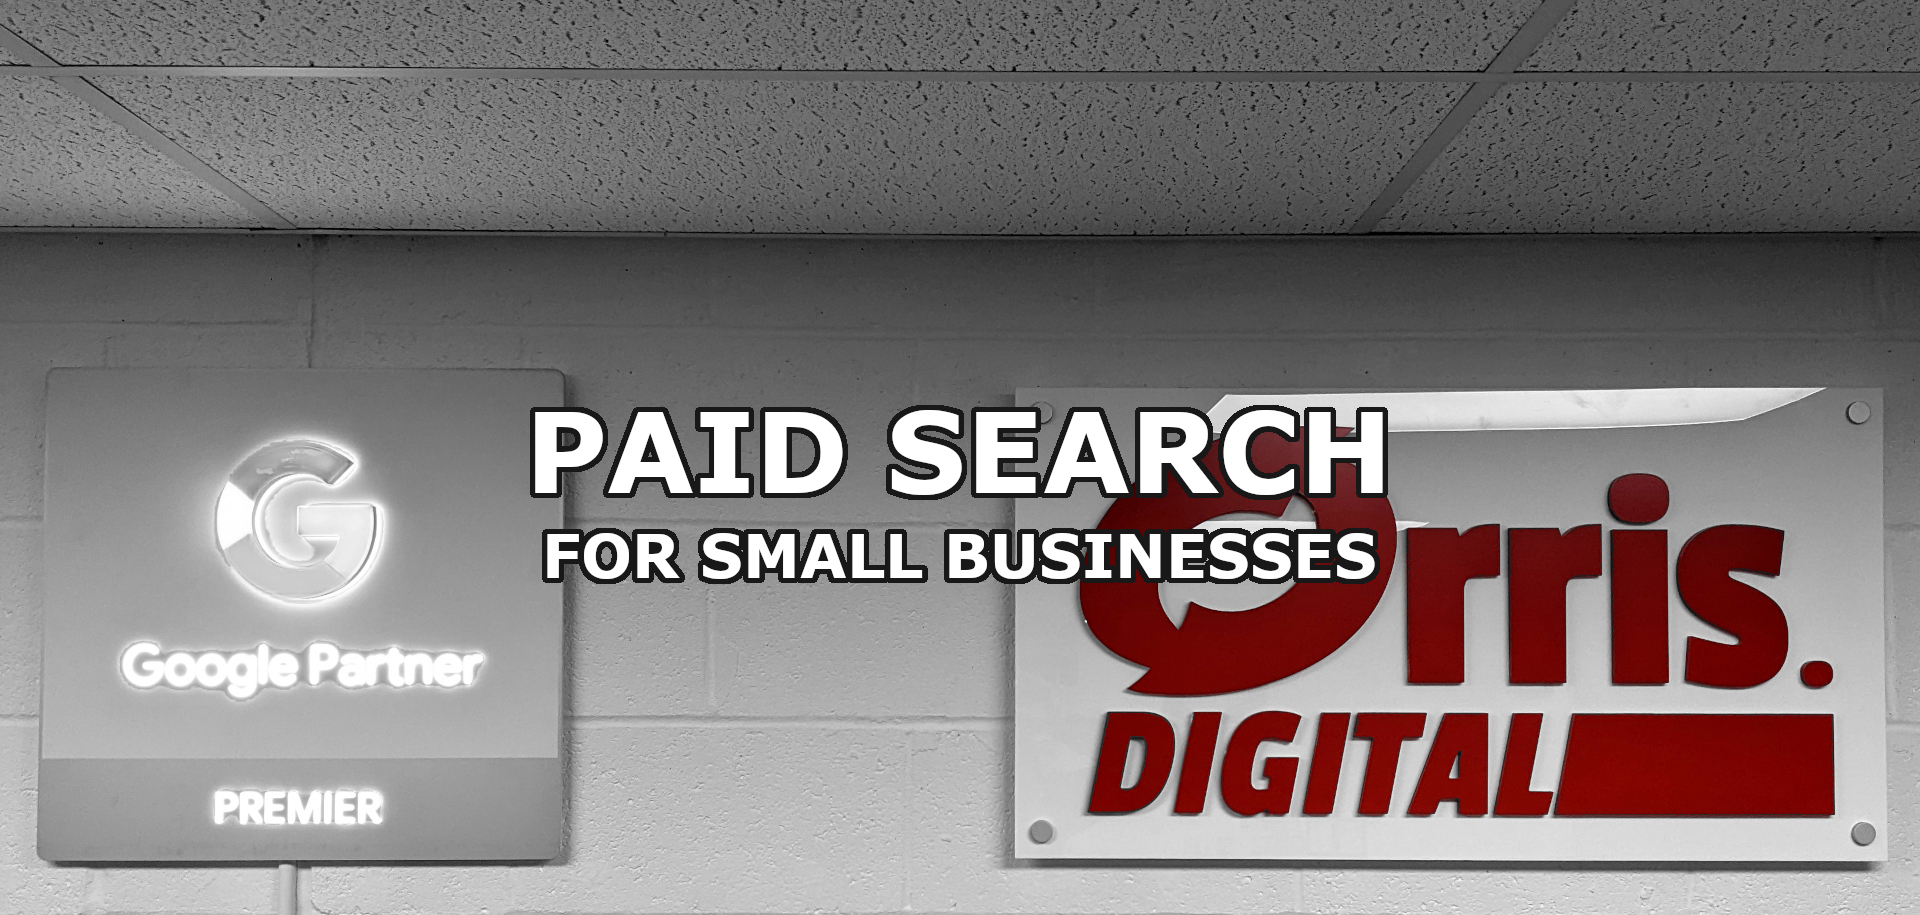 Paid Search For Small Businesses